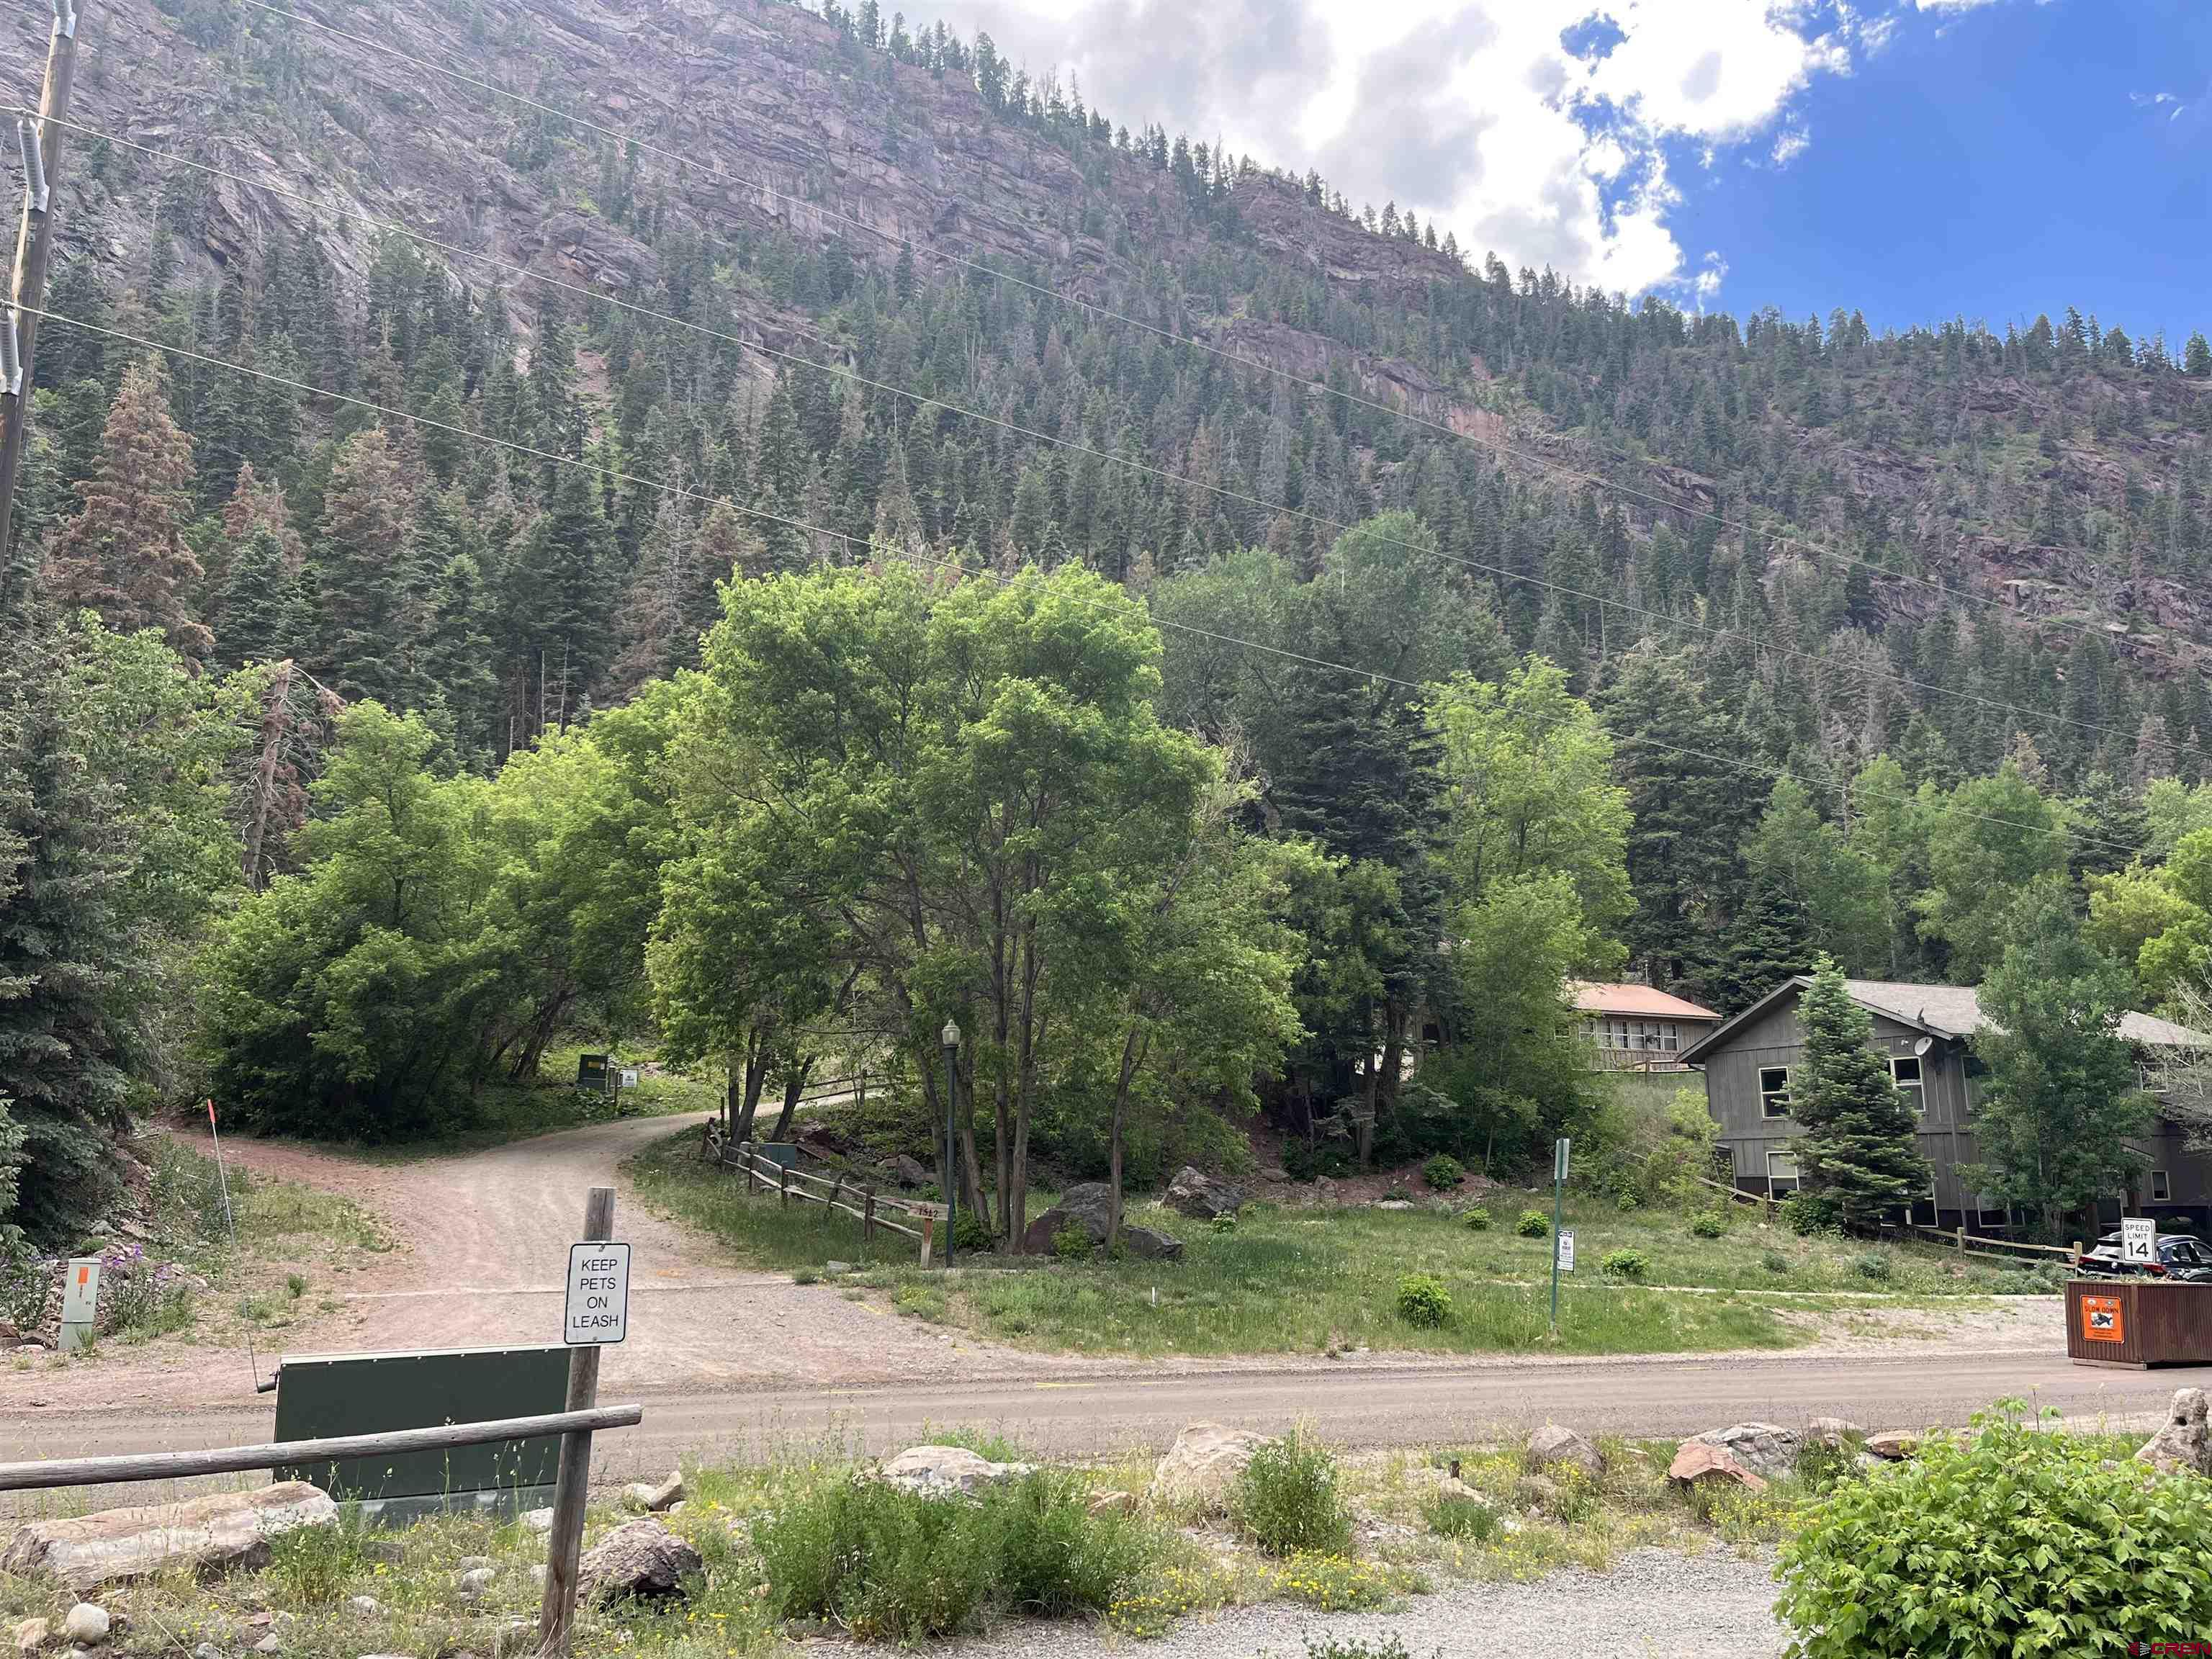 This multi- family zoned building lot is located just outside of the historic town of Ouray. Property is directly across from the Uncompahgre River, and  River Walk Trail, which is a 2-mile loop. This beautiful walking trail is used year-round by the locals. The 180-degree views from this property are over the top amazing. Unobstructed river views as well as Gold Hill directly right in your face. This property is close to town but just far enough away from the busyness of being right in town.  Build your dream single family vacation home, duplex or Triplex. Plenty of building options to fit your needs. If not familiar with Ouray, it’s a magical old western town. Once a hidden gem that is now being loved by many vacationers and tourists. Not many building parcels left in Ouray. Don’t hesitate and give this property a look. You won’t be disappointed in the location, views and neighborhood around it.